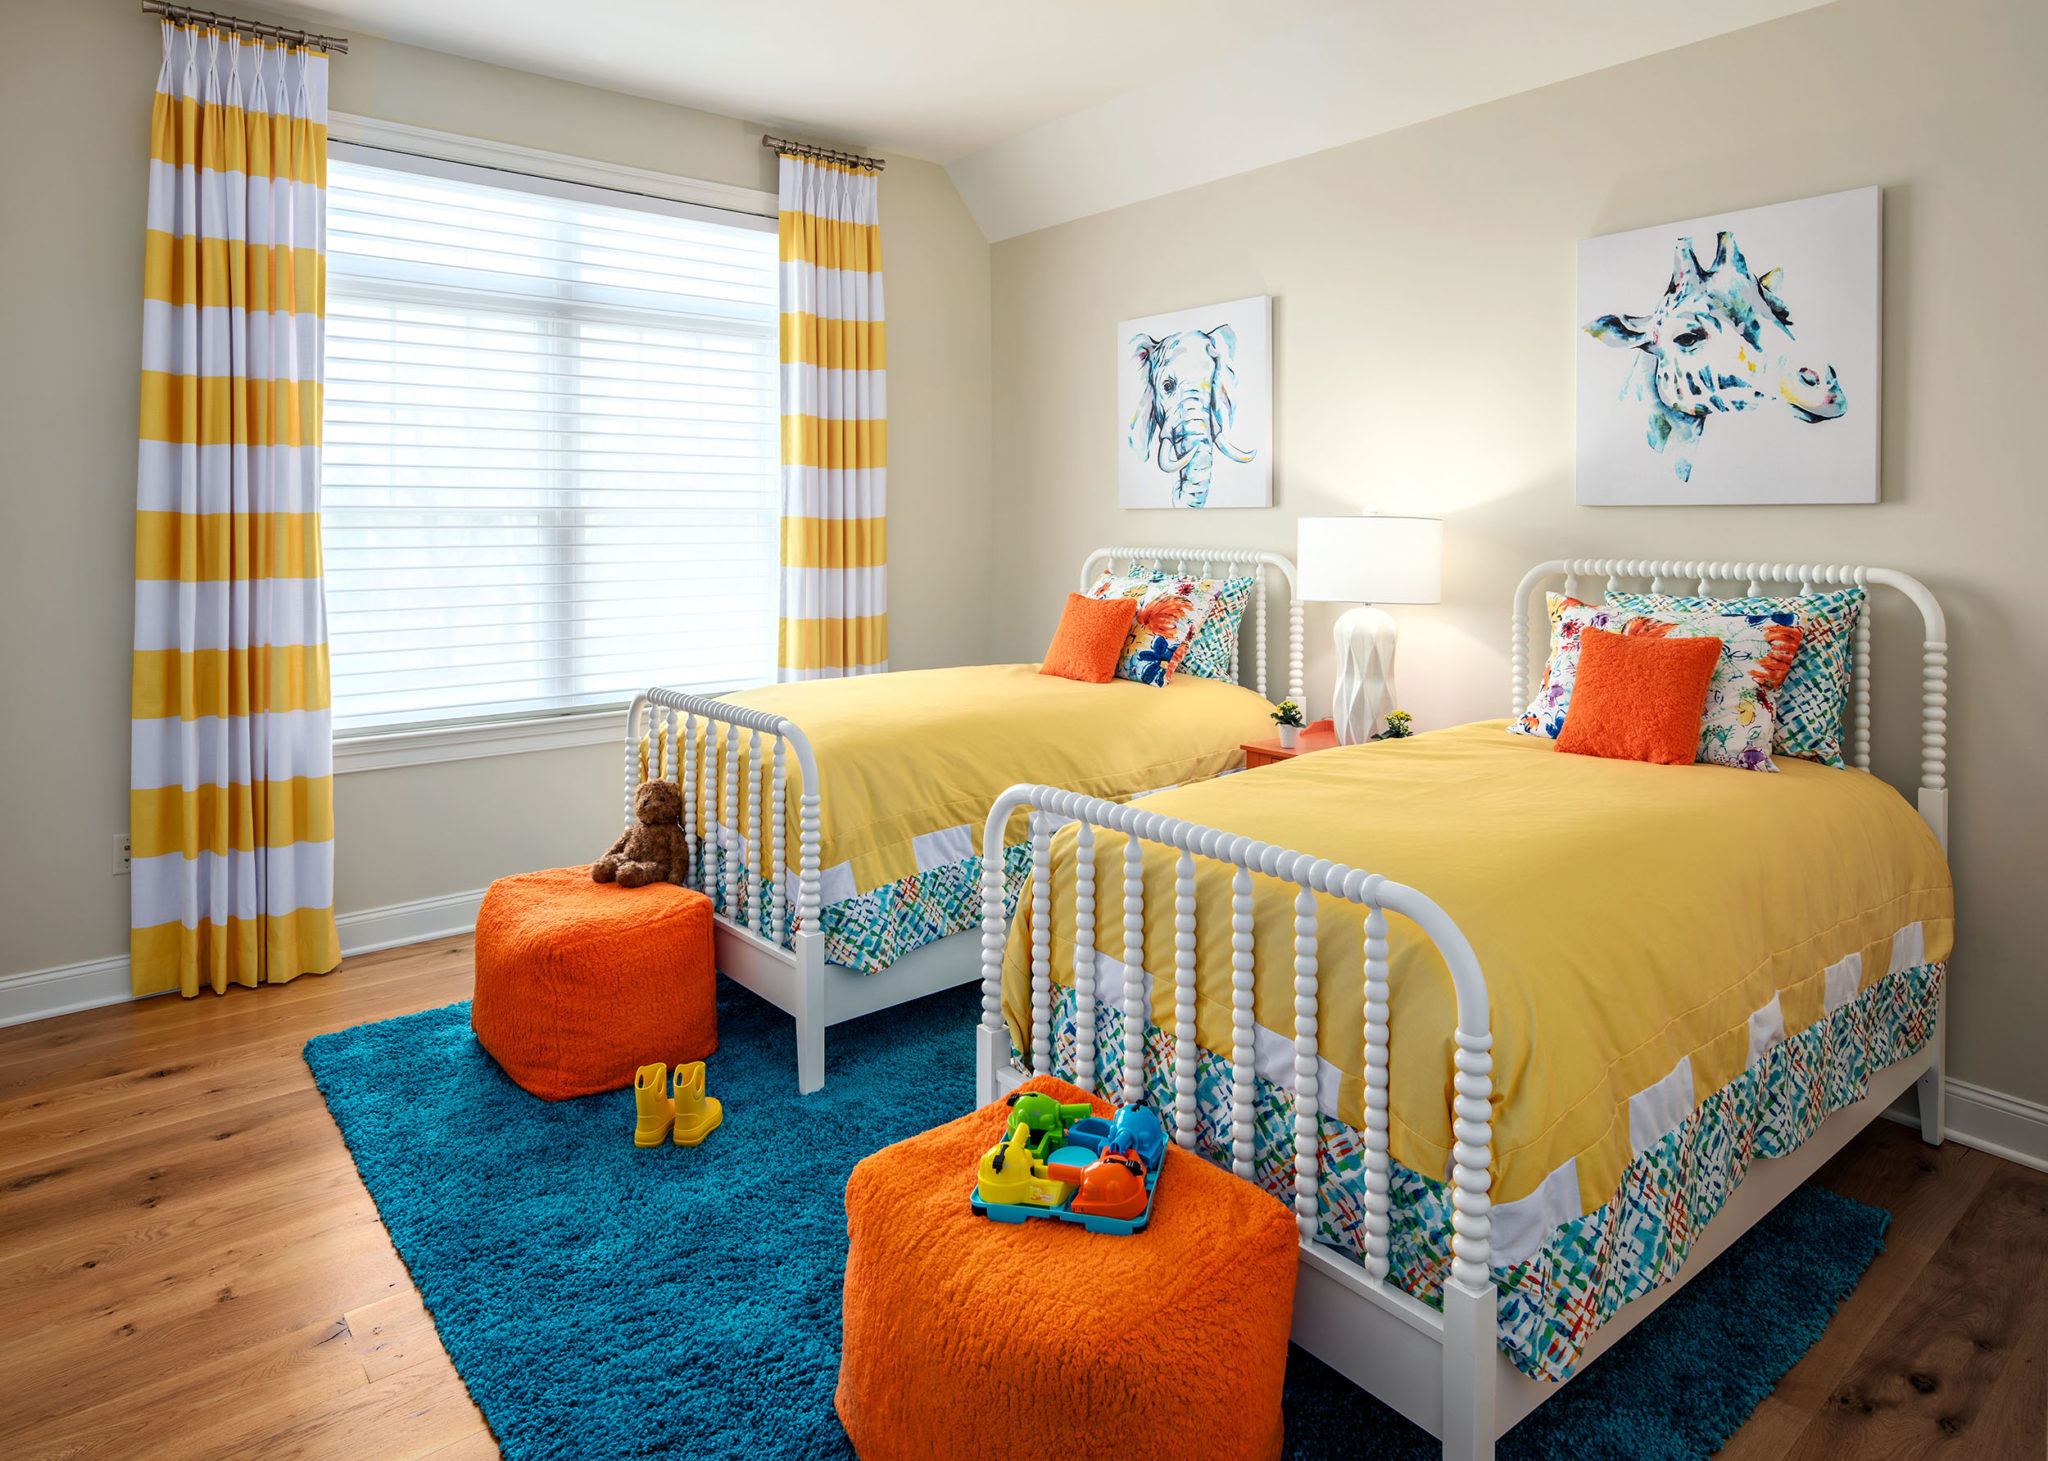 Kids’ Rooms for Every Age